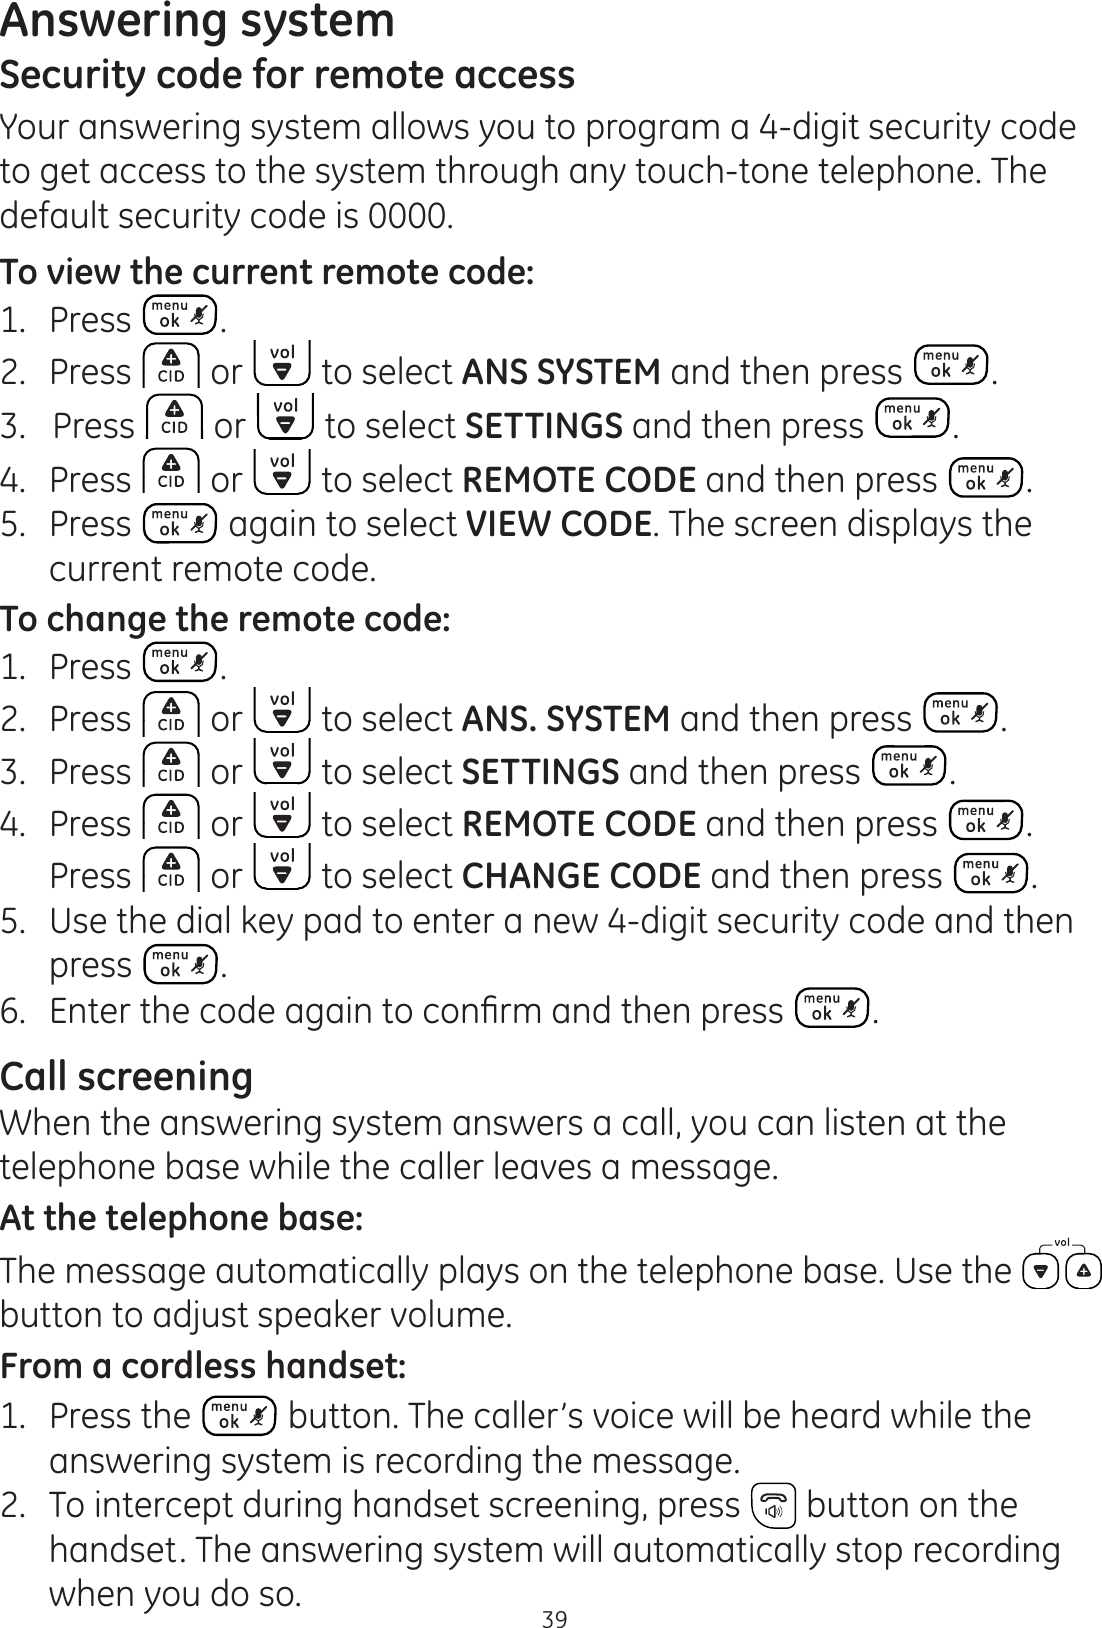 Answering system39Security code for remote accessYour answering system allows you to program a 4-digit security code to get access to the system through any touch-tone telephone. The default security code is 0000.To view the current remote code:1.  Press .2.  Press   or   to select ANS SYSTEM and then press  . 3.   Press   or   to select SETTINGS and then press  . 4.   Press   or   to select REMOTE CODE and then press  . 5.   Press   again to select VIEW CODE. The screen displays the current remote code. To change the remote code:1.  Press  .2.  Press   or   to select ANS. SYSTEM and then press  . 3.  Press   or   to select SETTINGS and then press  . 4.   Press   or   to select REMOTE CODE and then press  .  Press   or   to select CHANGE CODE and then press  . 5.  Use the dial key pad to enter a new 4-digit security code and then press  . (QWHUWKHFRGHDJDLQWRFRQ¿UPDQGWKHQSUHVV .Call screening When the answering system answers a call, you can listen at the telephone base while the caller leaves a message. At the telephone base:The message automatically plays on the telephone base. Use the   button to adjust speaker volume. From a cordless handset:1.   Press the   button. The caller’s voice will be heard while the answering system is recording the message.2.   To intercept during handset screening, press   button on the handset. The answering system will automatically stop recording when you do so.